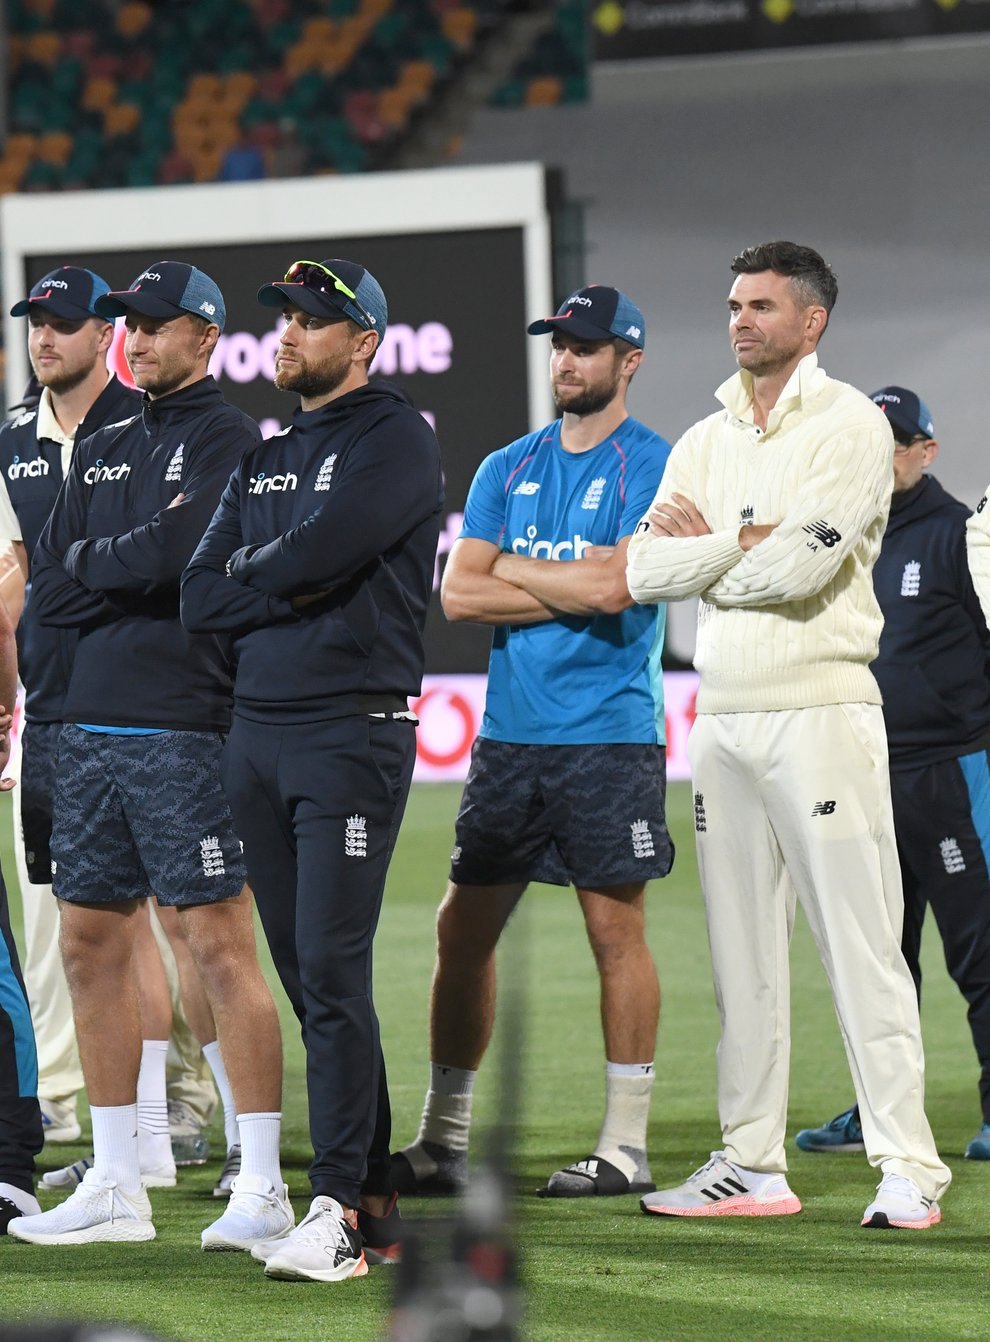 England capitulated against Australia Down Under, leading calls for a fresh look at whether county cricket is preparing players for Test level (Darren England via AAP/PA)